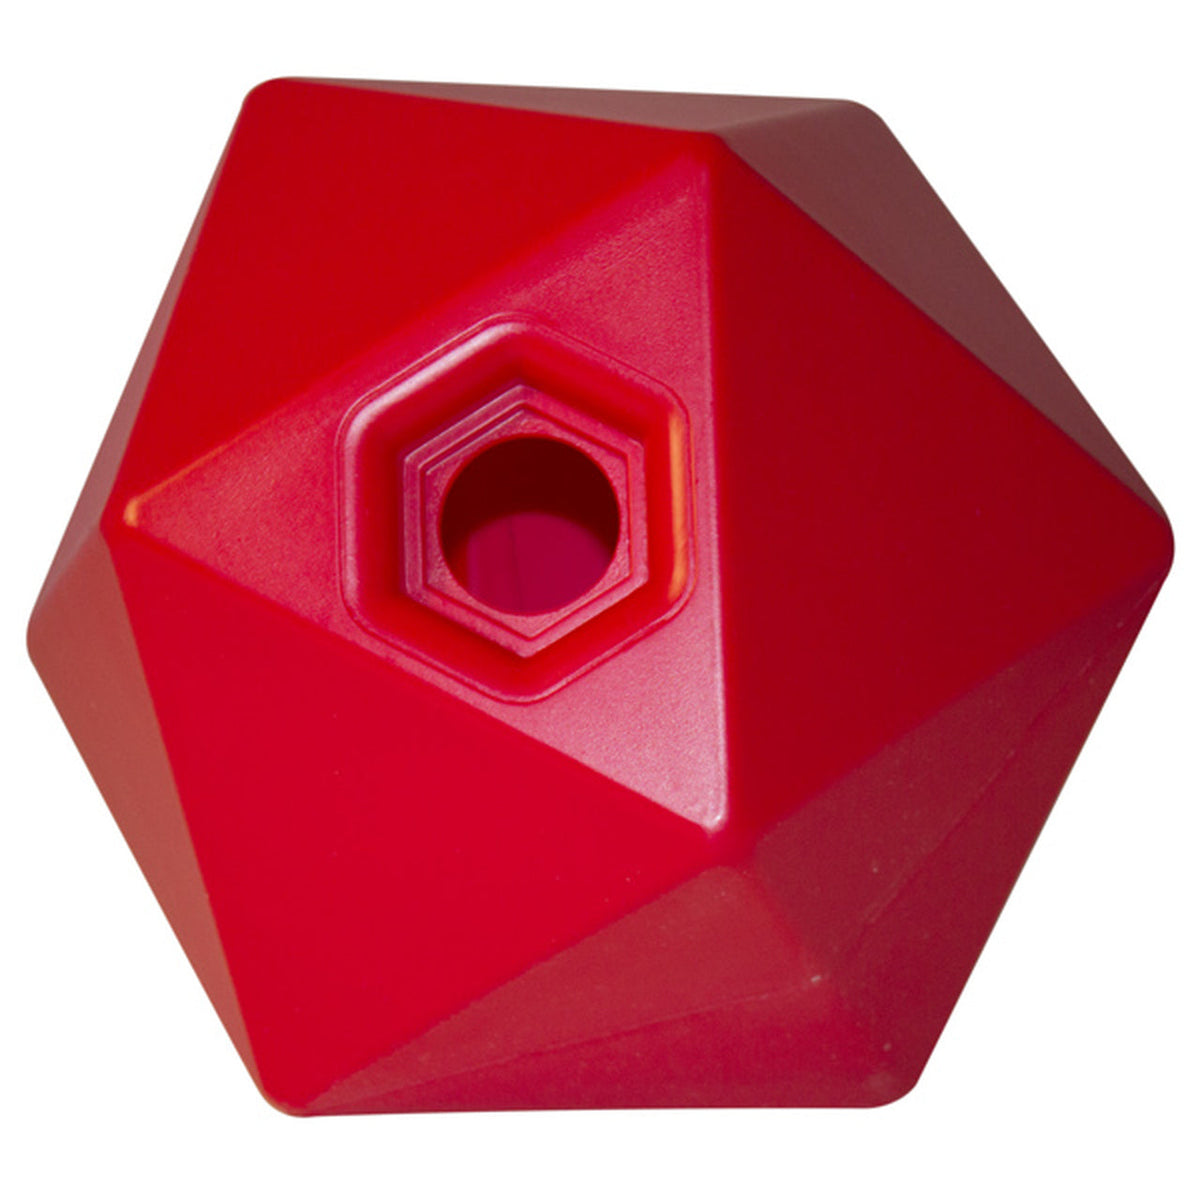 Red treat ball with numerous flat sides and a small treat opening.